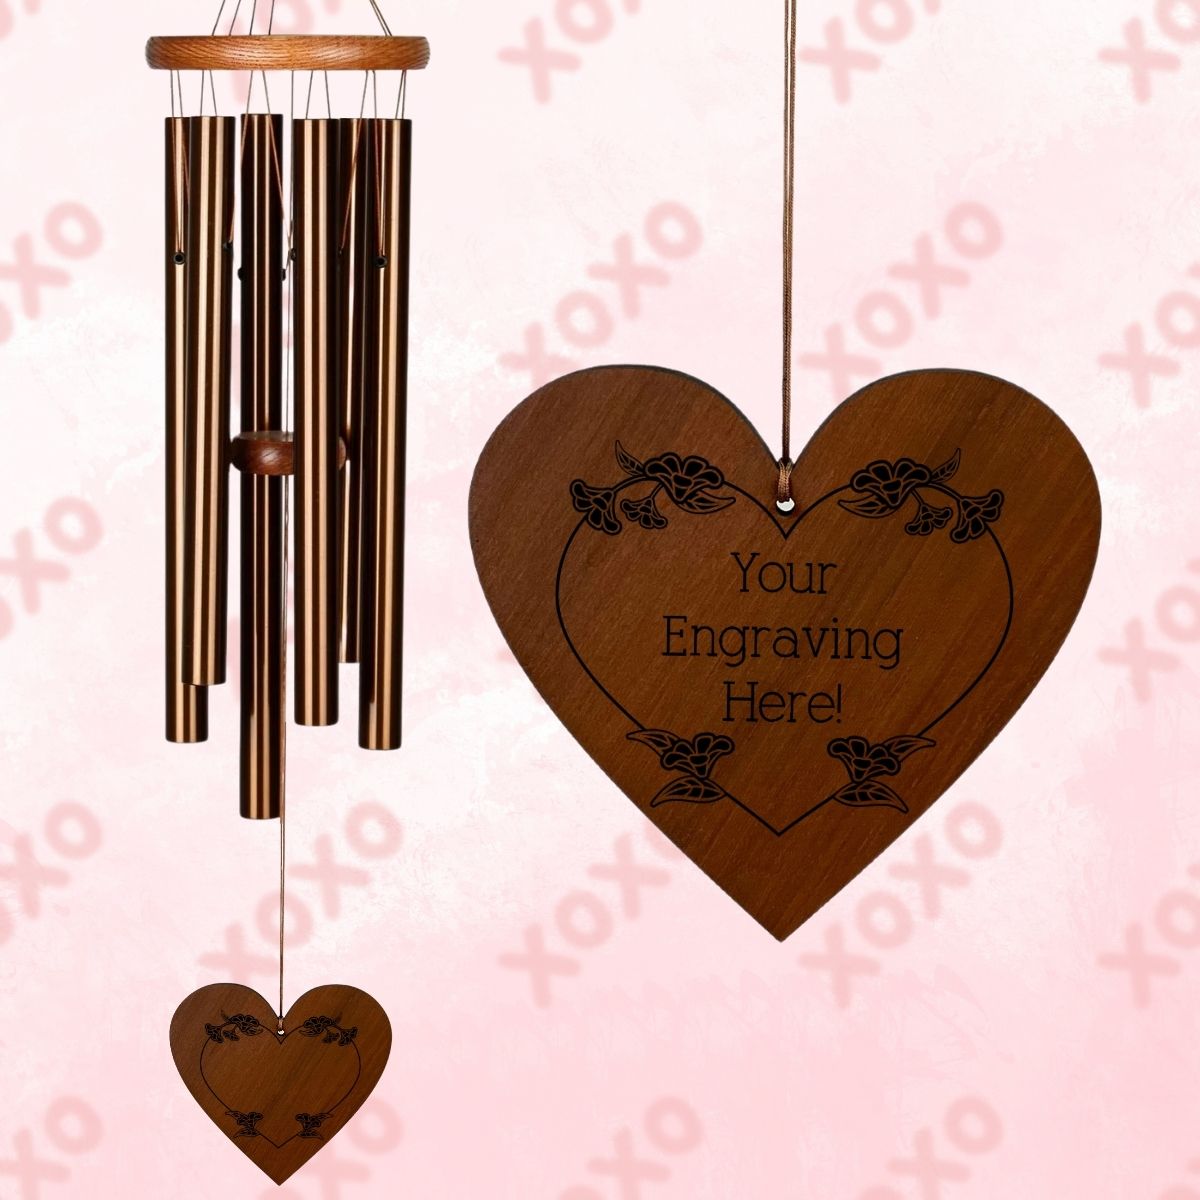 Amazing Grace 25 Inch Bronze Wind Chime - Engravable Blossom Heart Sail